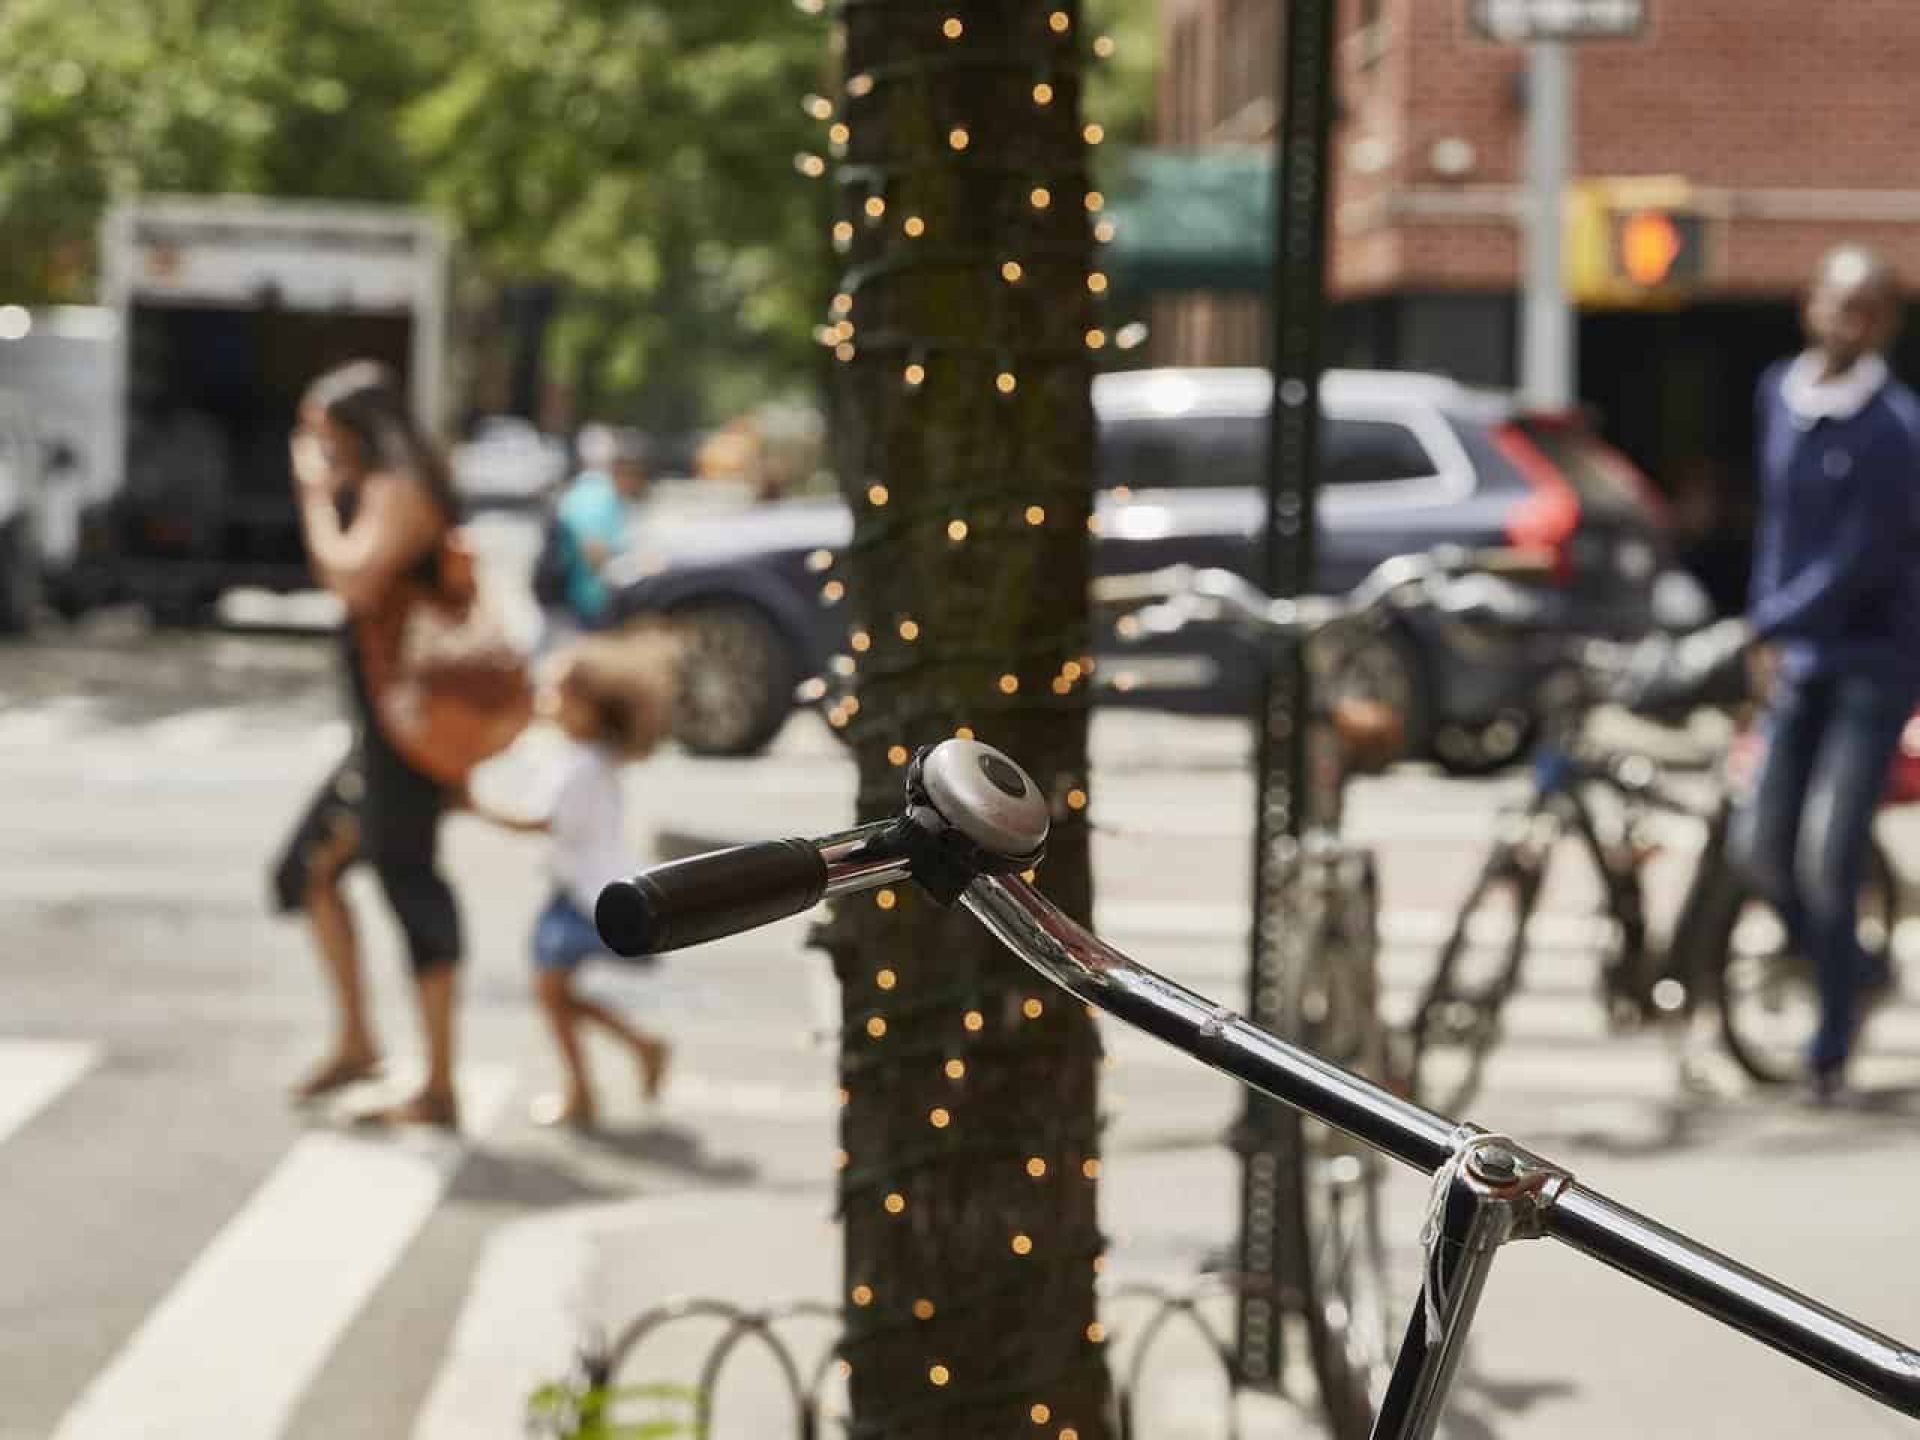 A tree planted in a sidewalk flower bed wrapped in white string lights with a bike handle in the foreground.